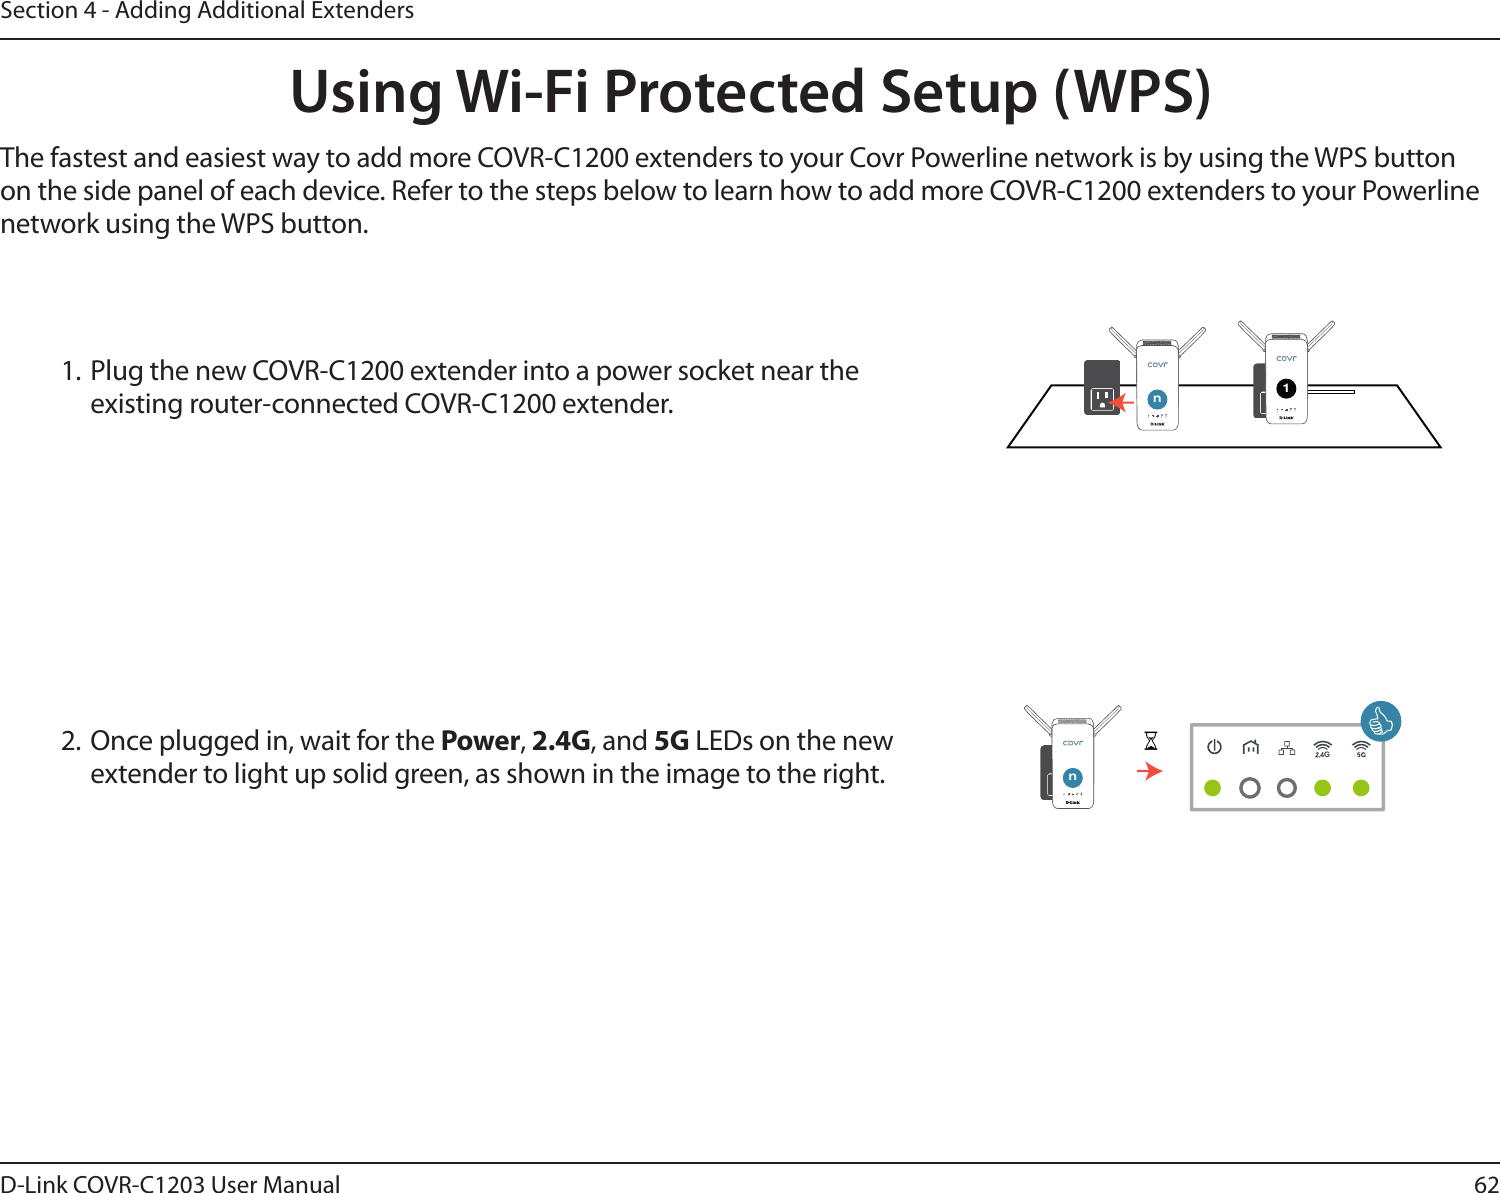 62D-Link COVR-C1203 User ManualSection 4 - Adding Additional ExtendersUsing Wi-Fi Protected Setup (WPS)The fastest and easiest way to add more COVR-C1200 extenders to your Covr Powerline network is by using the WPS button on the side panel of each device. Refer to the steps below to learn how to add more COVR-C1200 extenders to your Powerline network using the WPS button.2. Once plugged in, wait for the Power, 2.4G, and 5G LEDs on the new extender to light up solid green, as shown in the image to the right.1. Plug the new COVR-C1200 extender into a power socket near the existing router-connected COVR-C1200 extender. G1GnGGnG